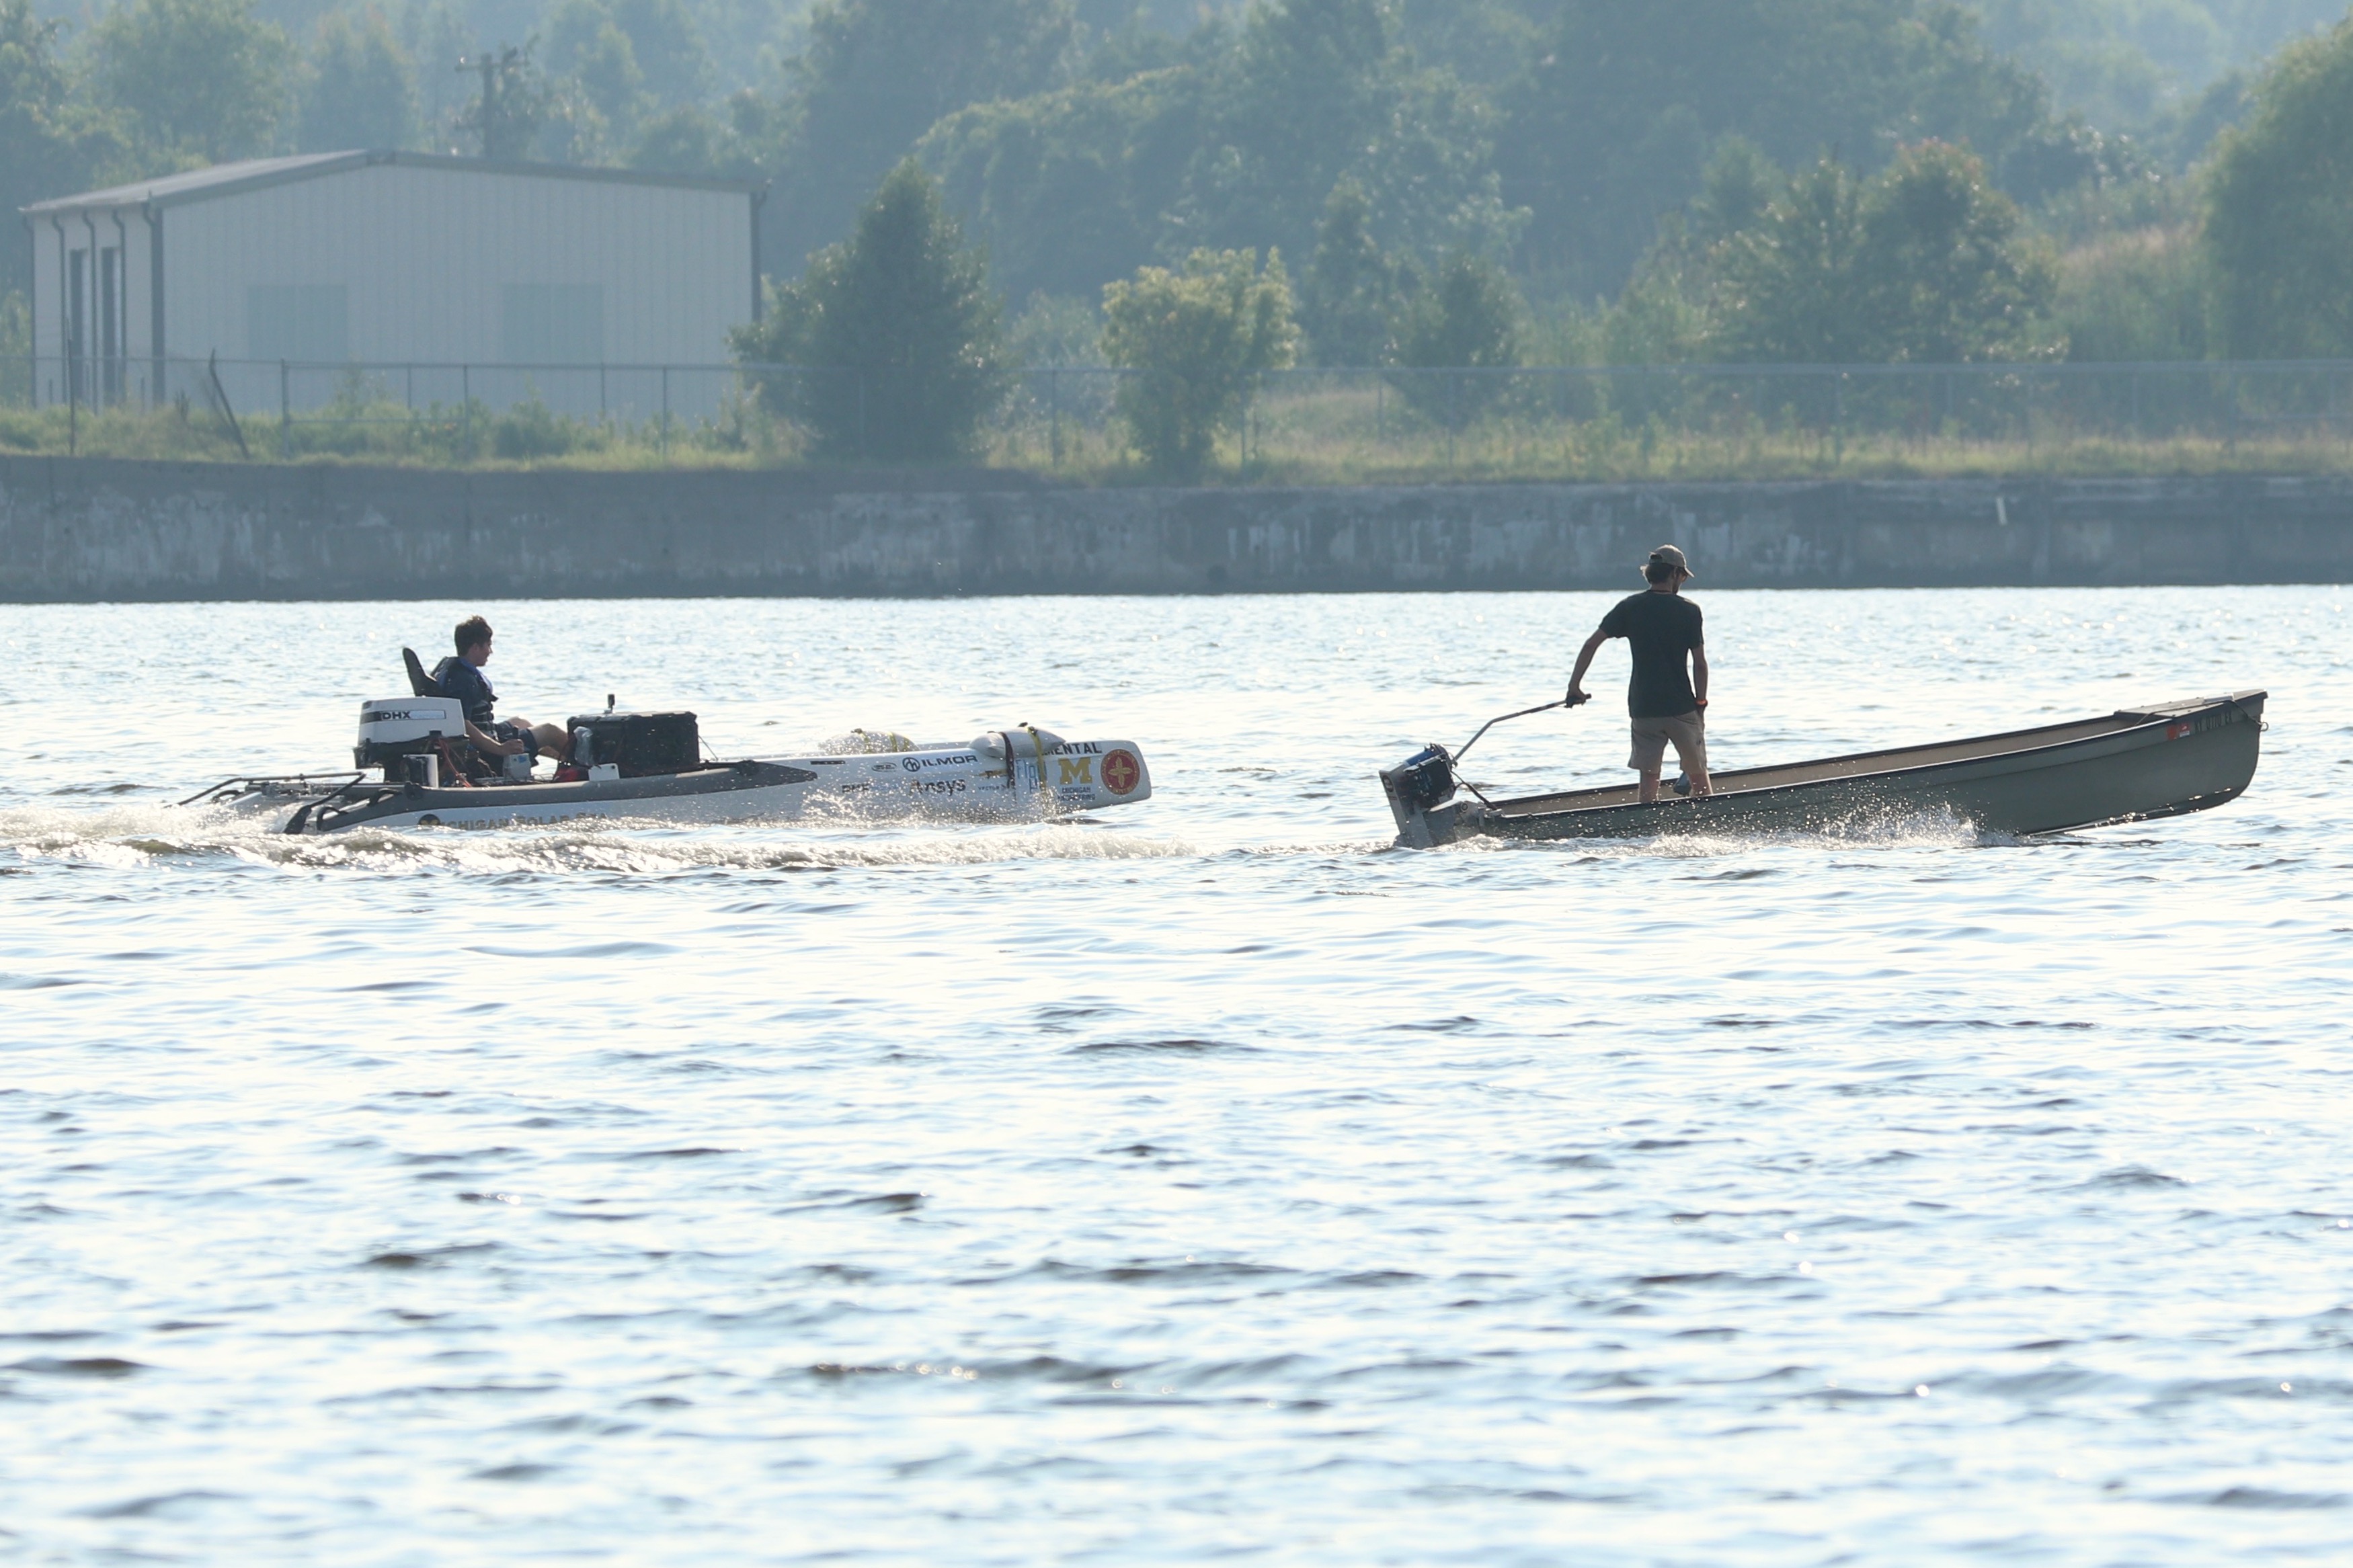 UMEB team racing their boat on the water